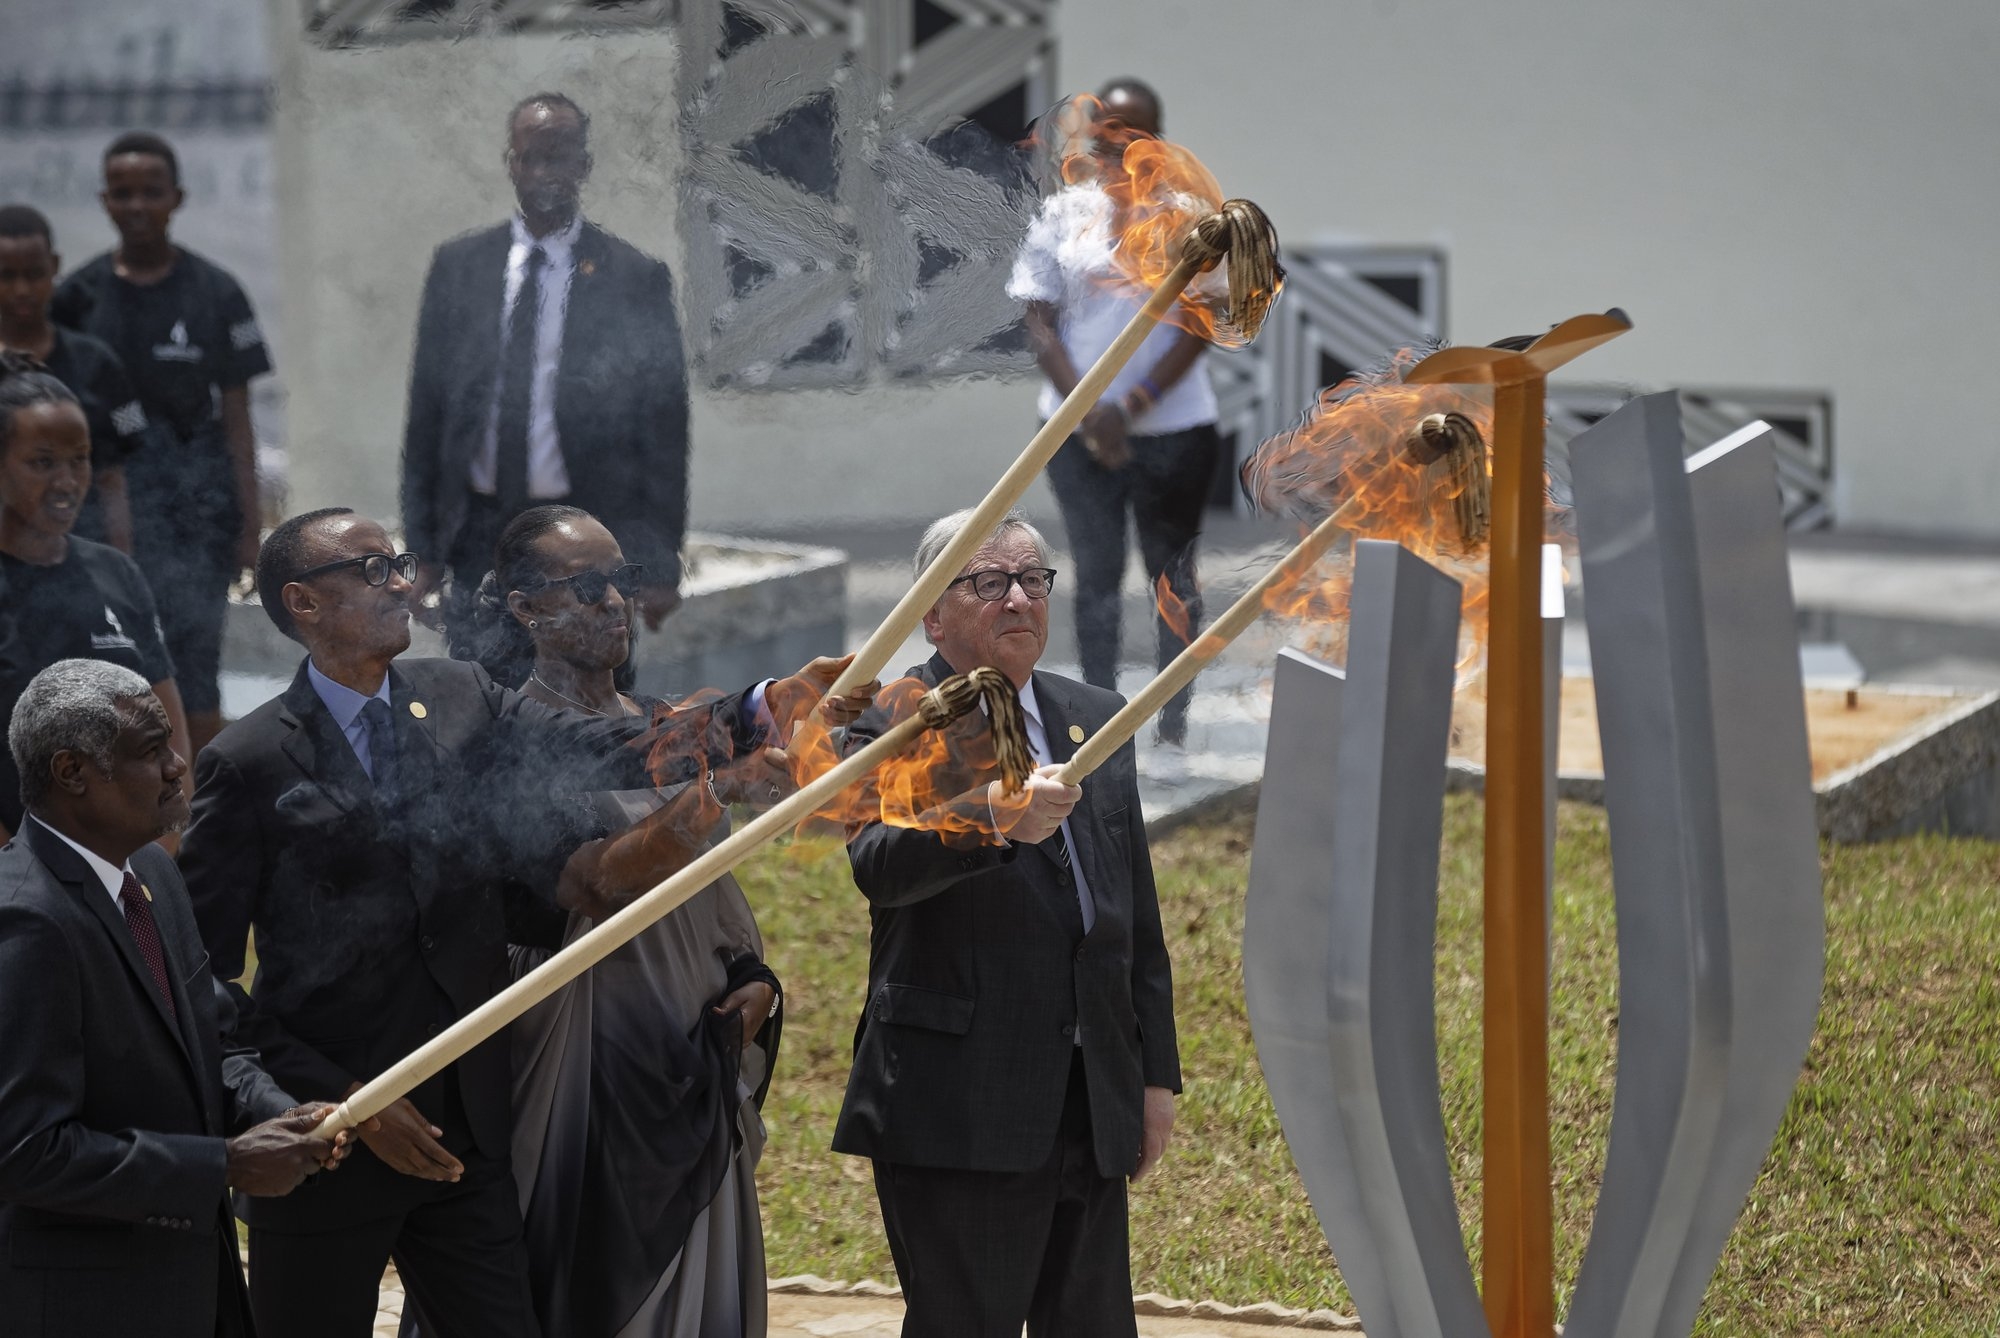 25 years after genocide, Rwanda has a new light, says leader